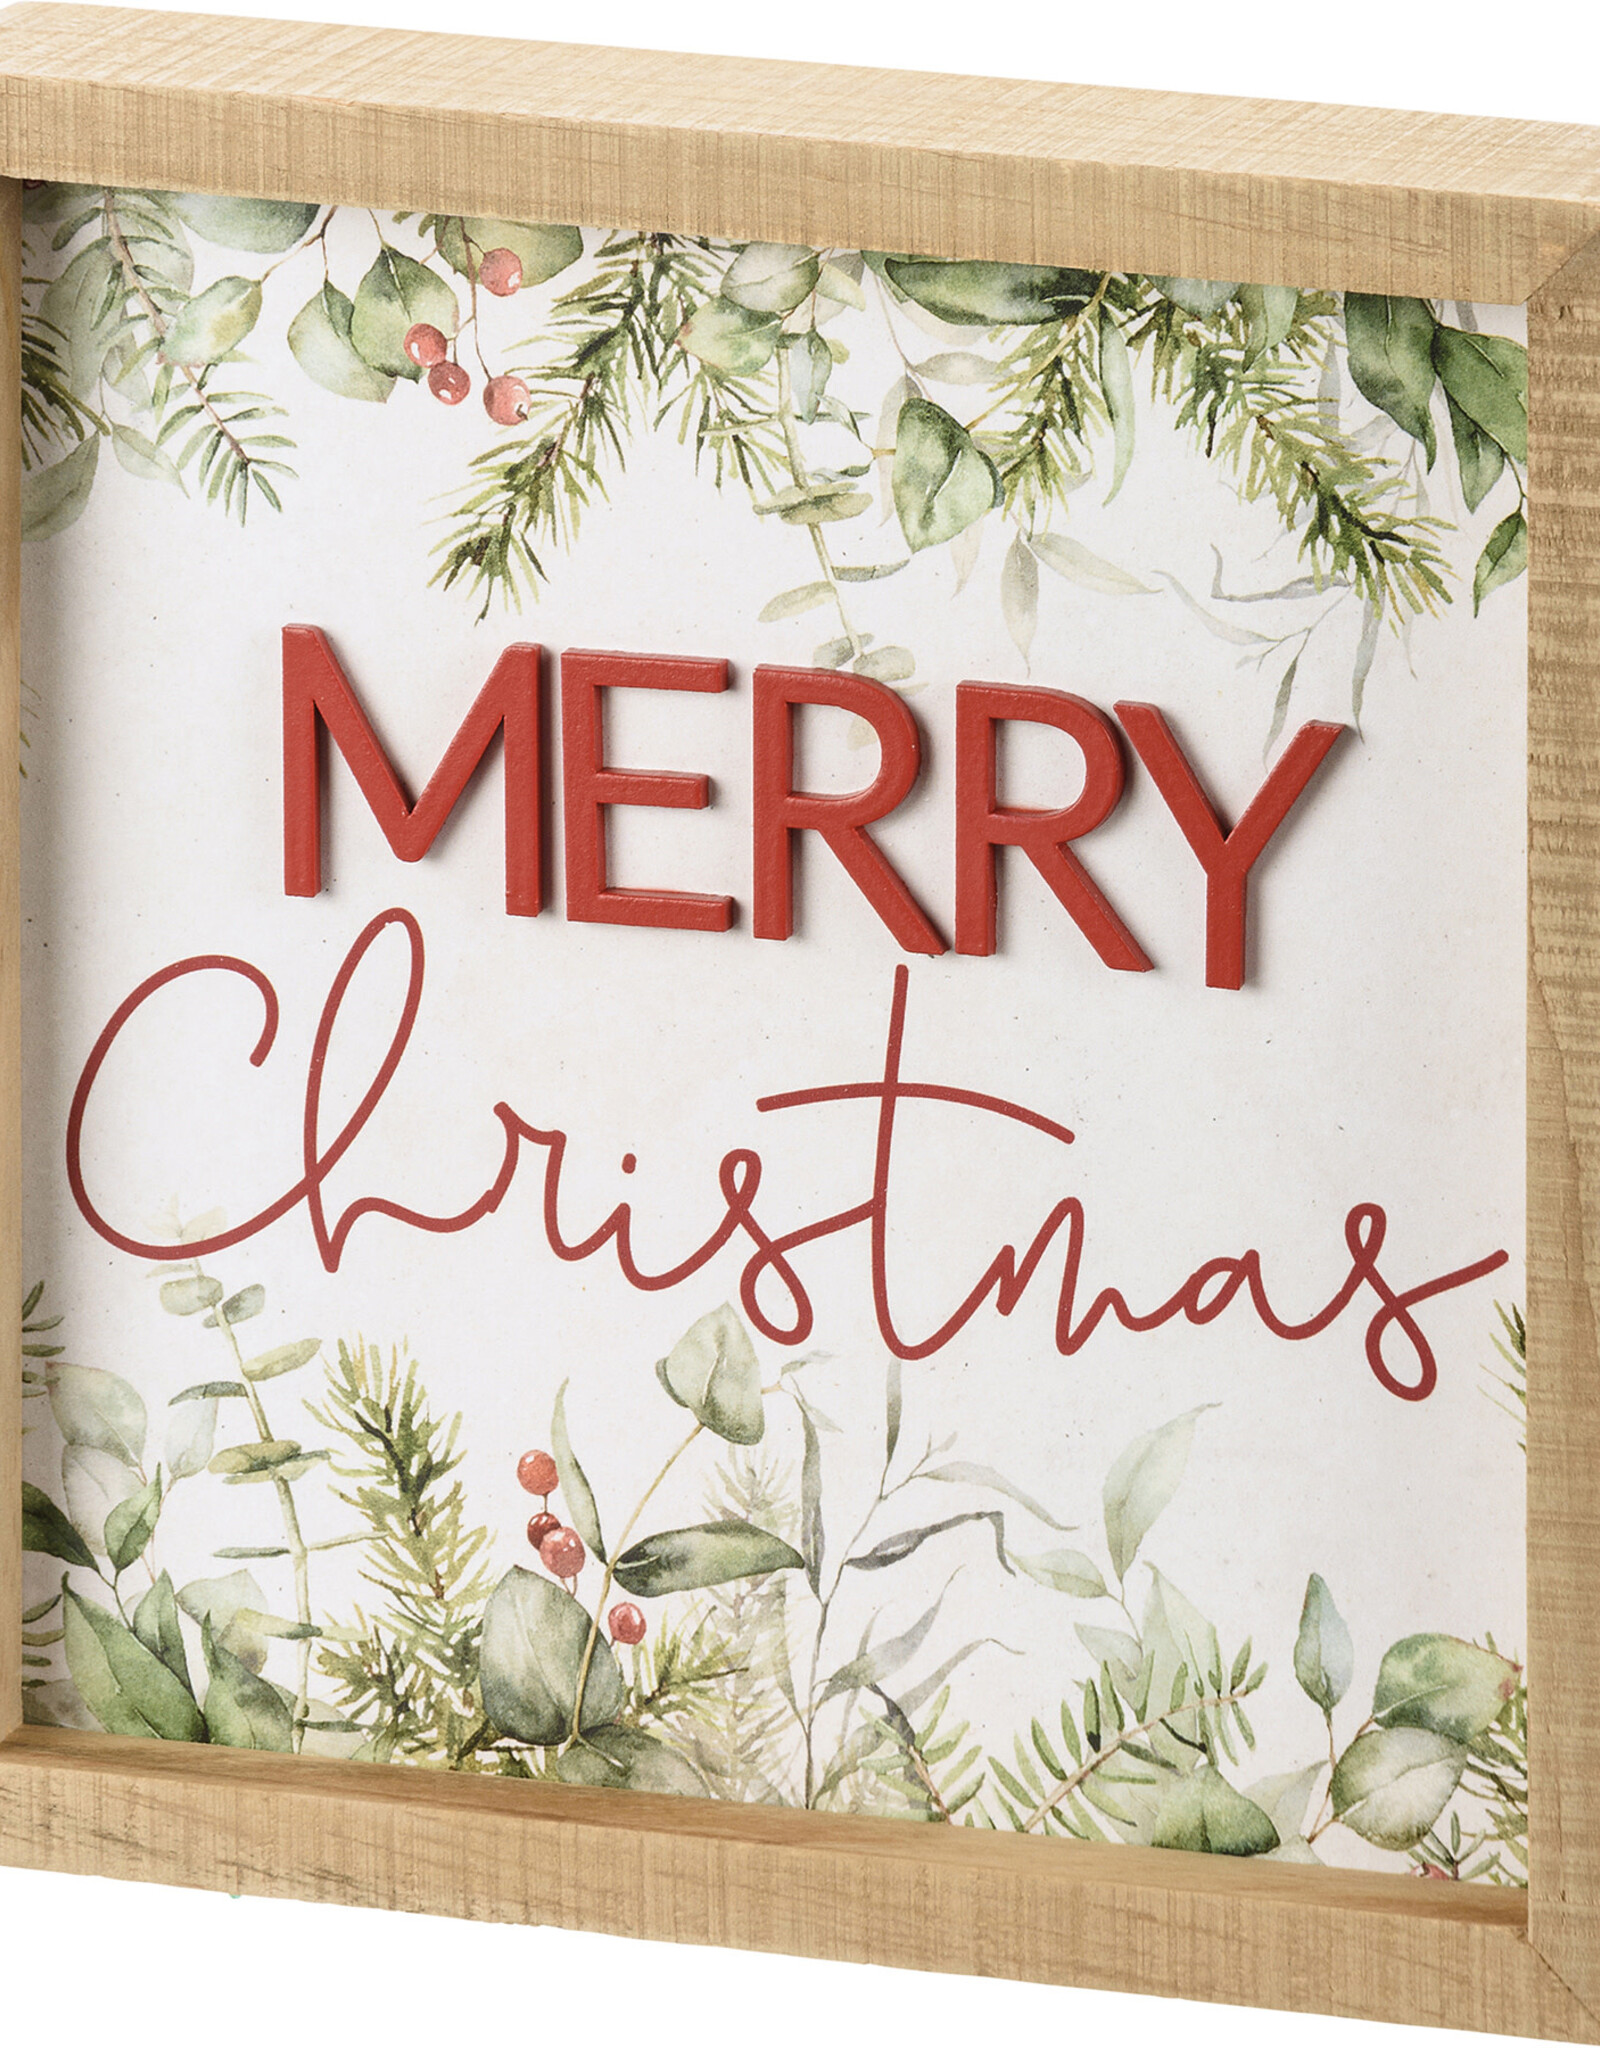 Merry Christmas Inset Box Sign